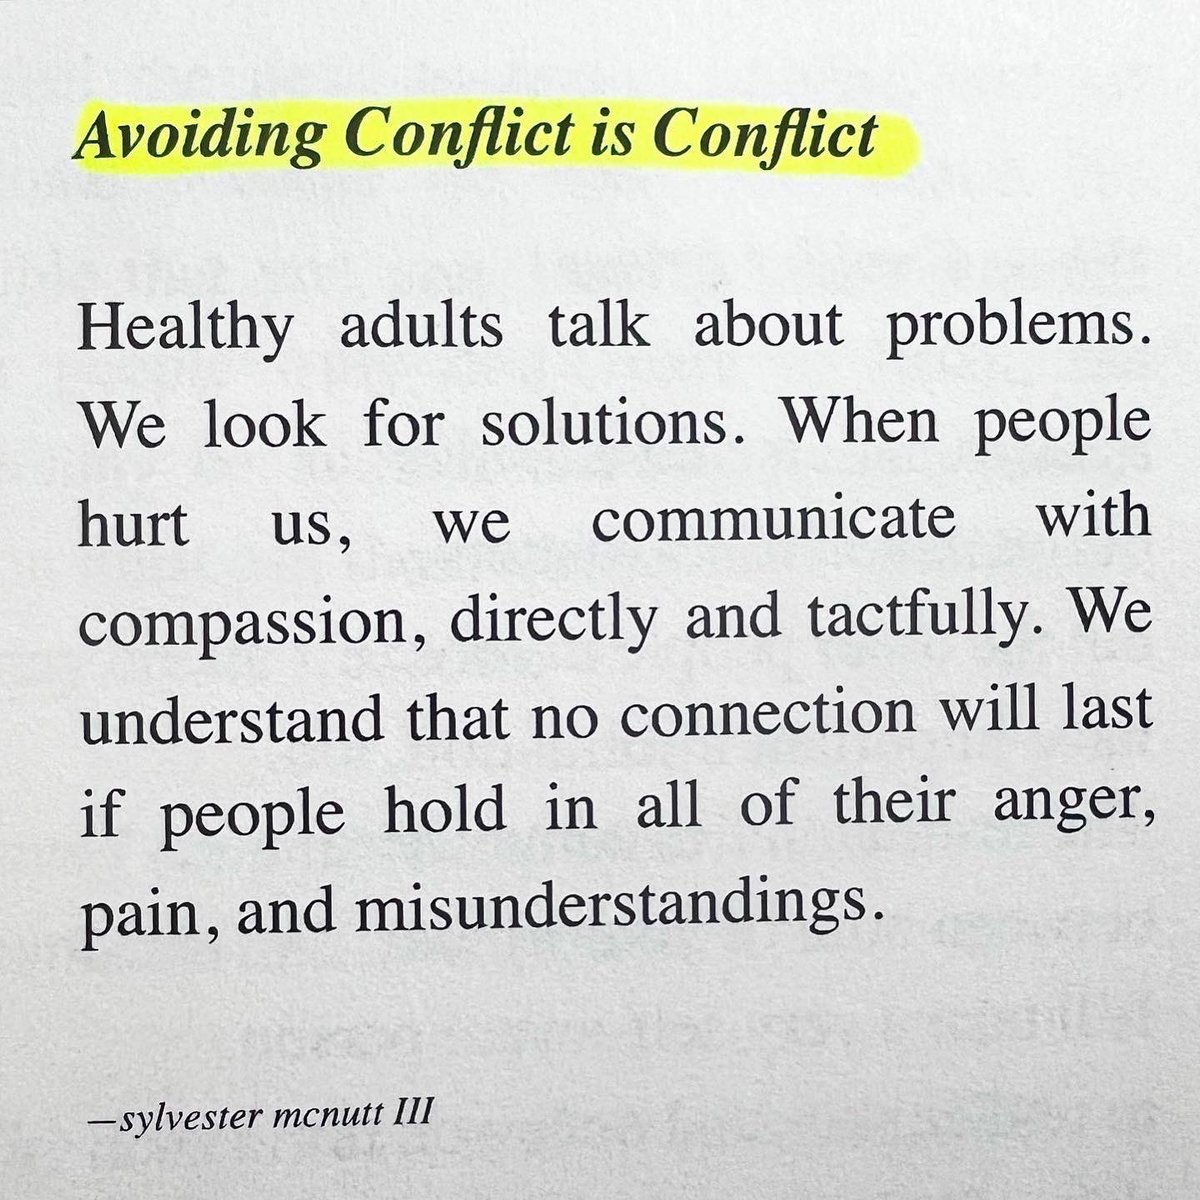 To evolve, you just embrace conflict